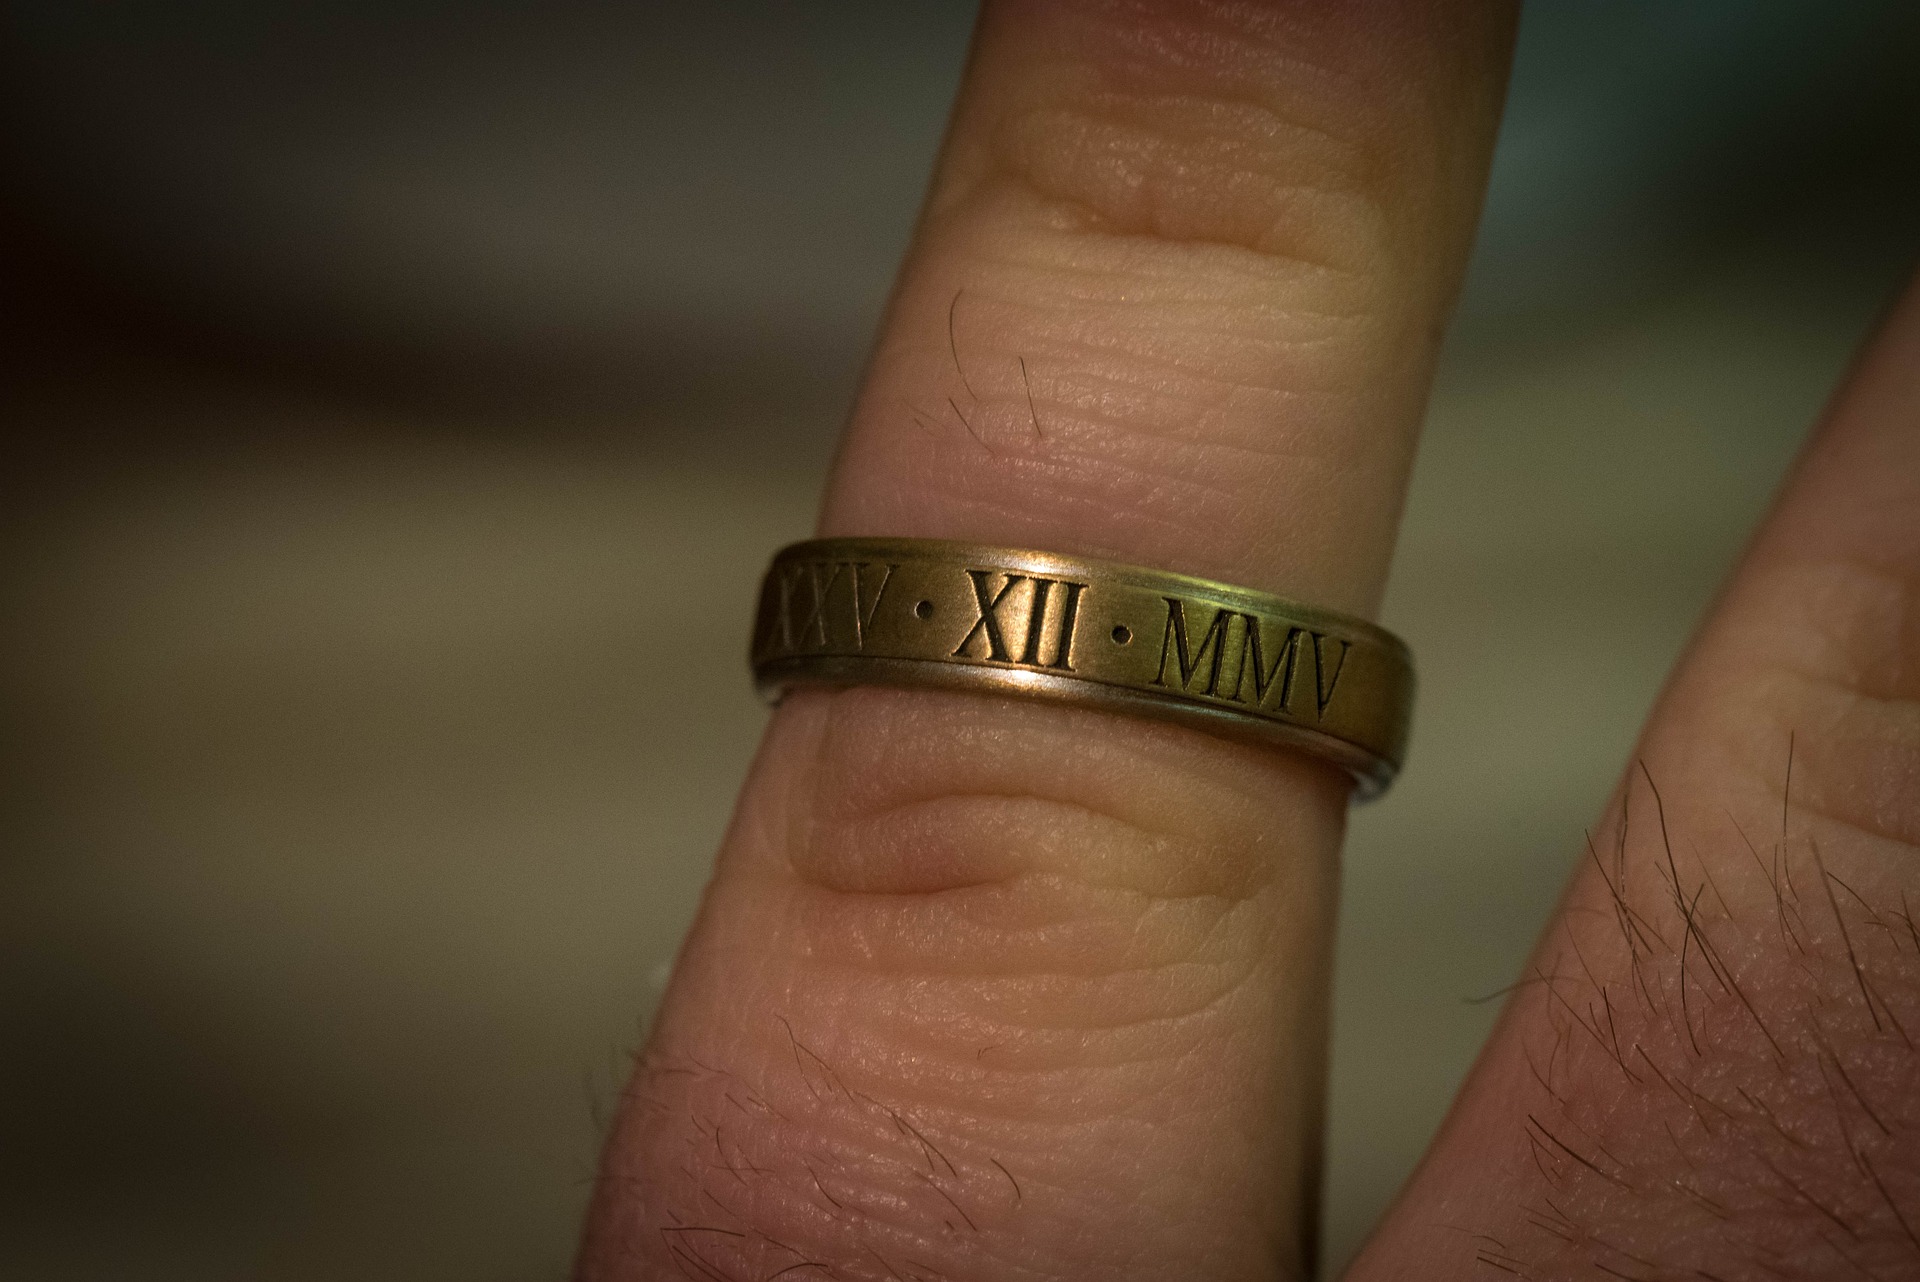 Why engraved rings are so expensive